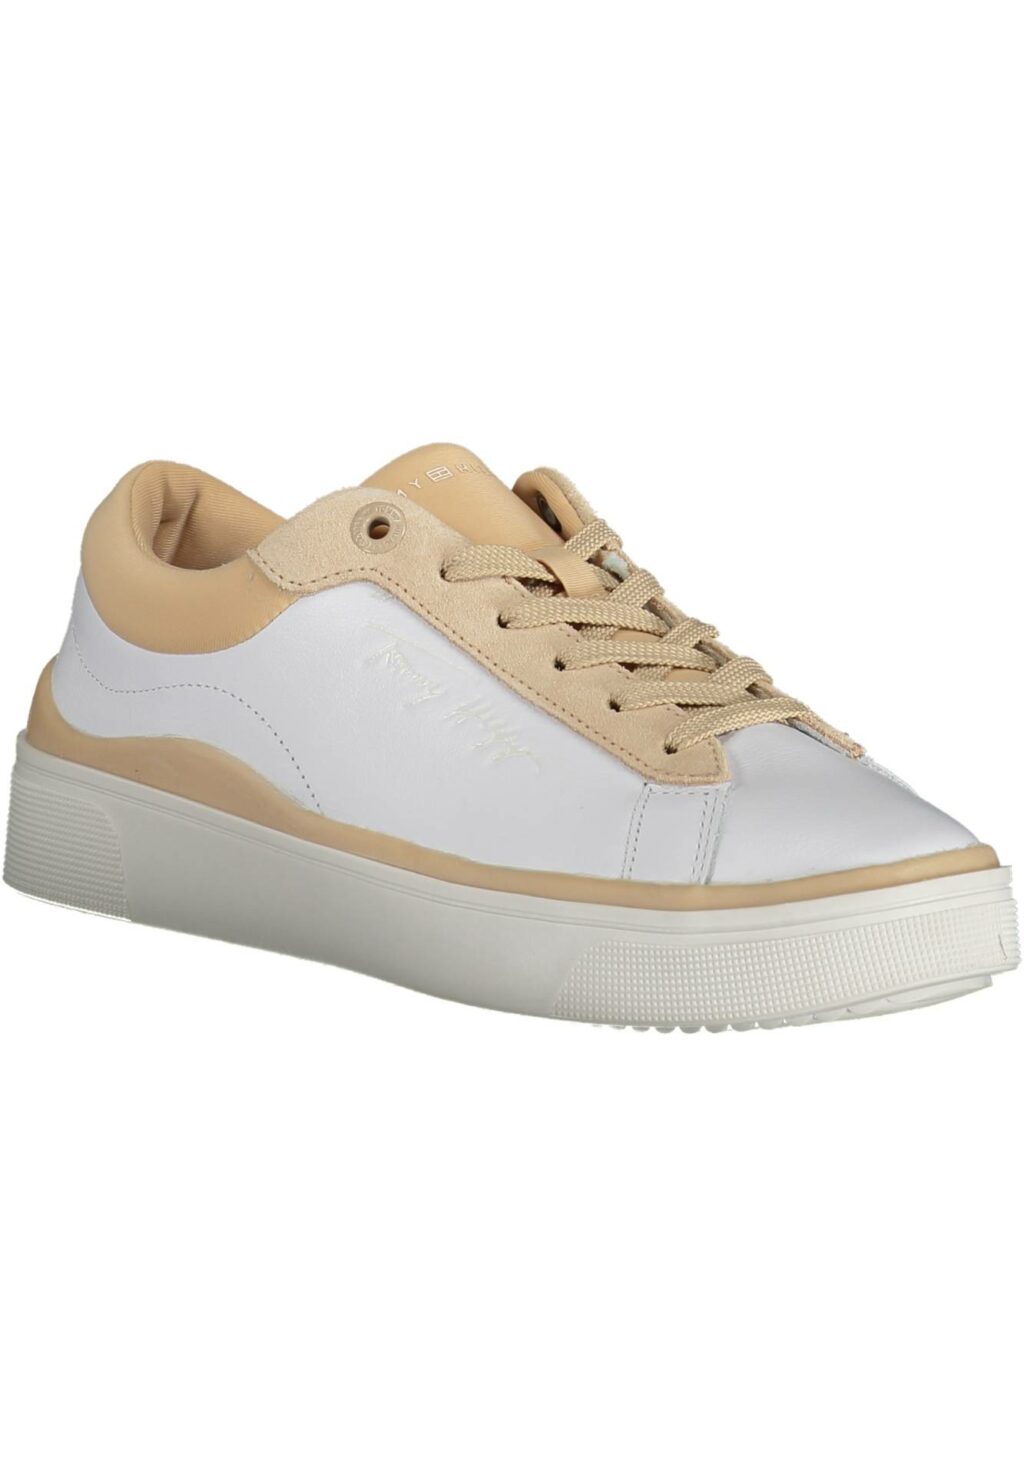 TOMMY HILFIGER WHITE WOMEN'S SPORTS SHOES FW0FW06317F_BIANCO_TRY